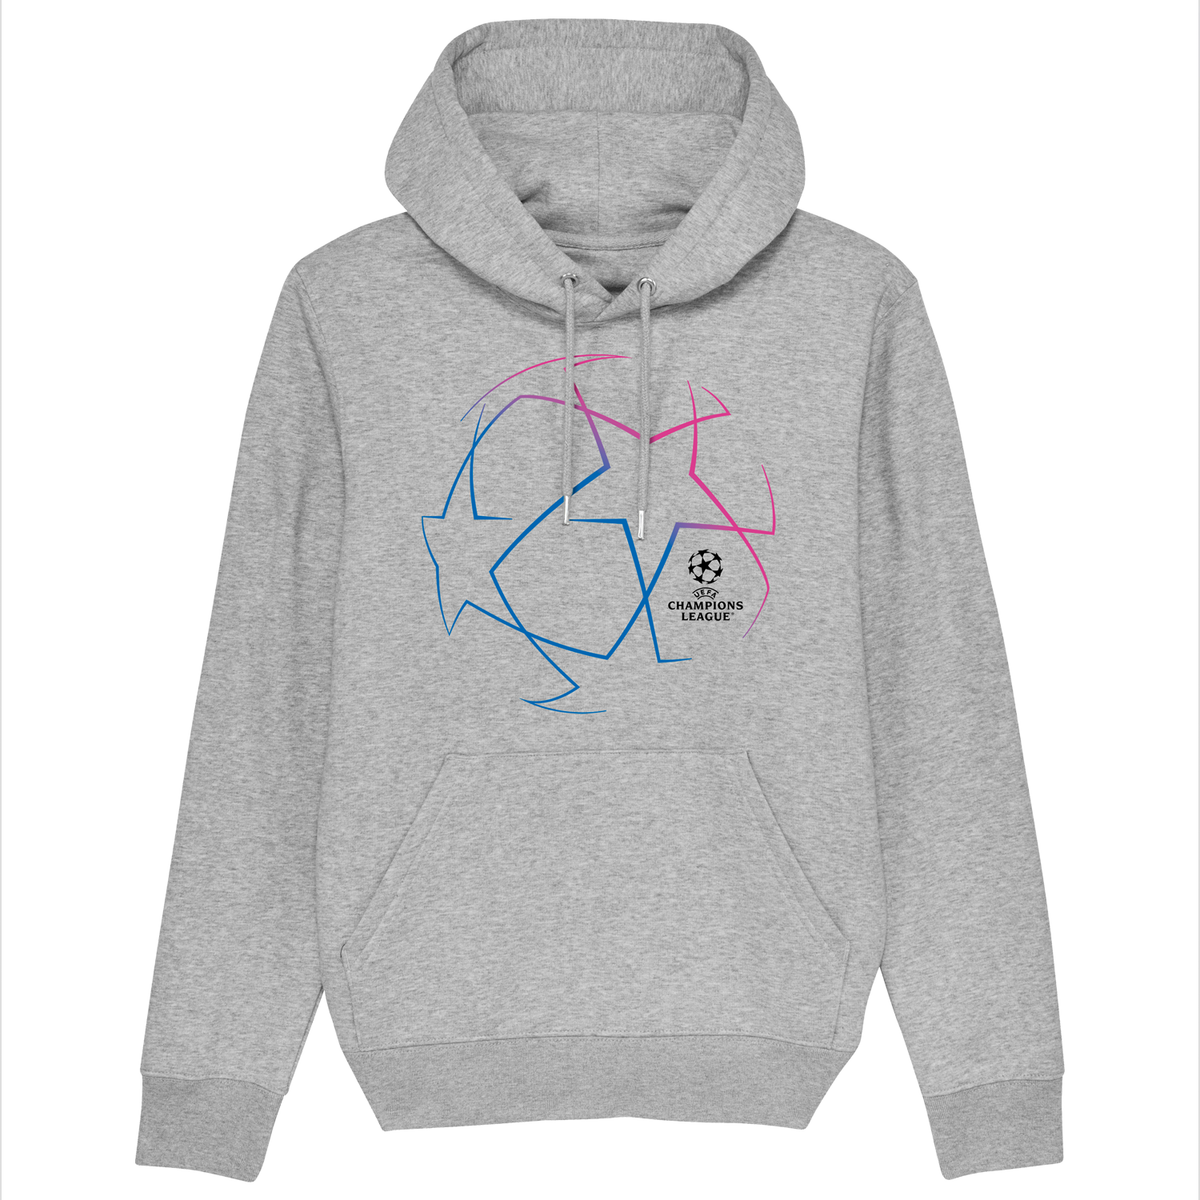 UEFA Champions League - Starball Grey Hoodie UEFA Club Competitions Online Store